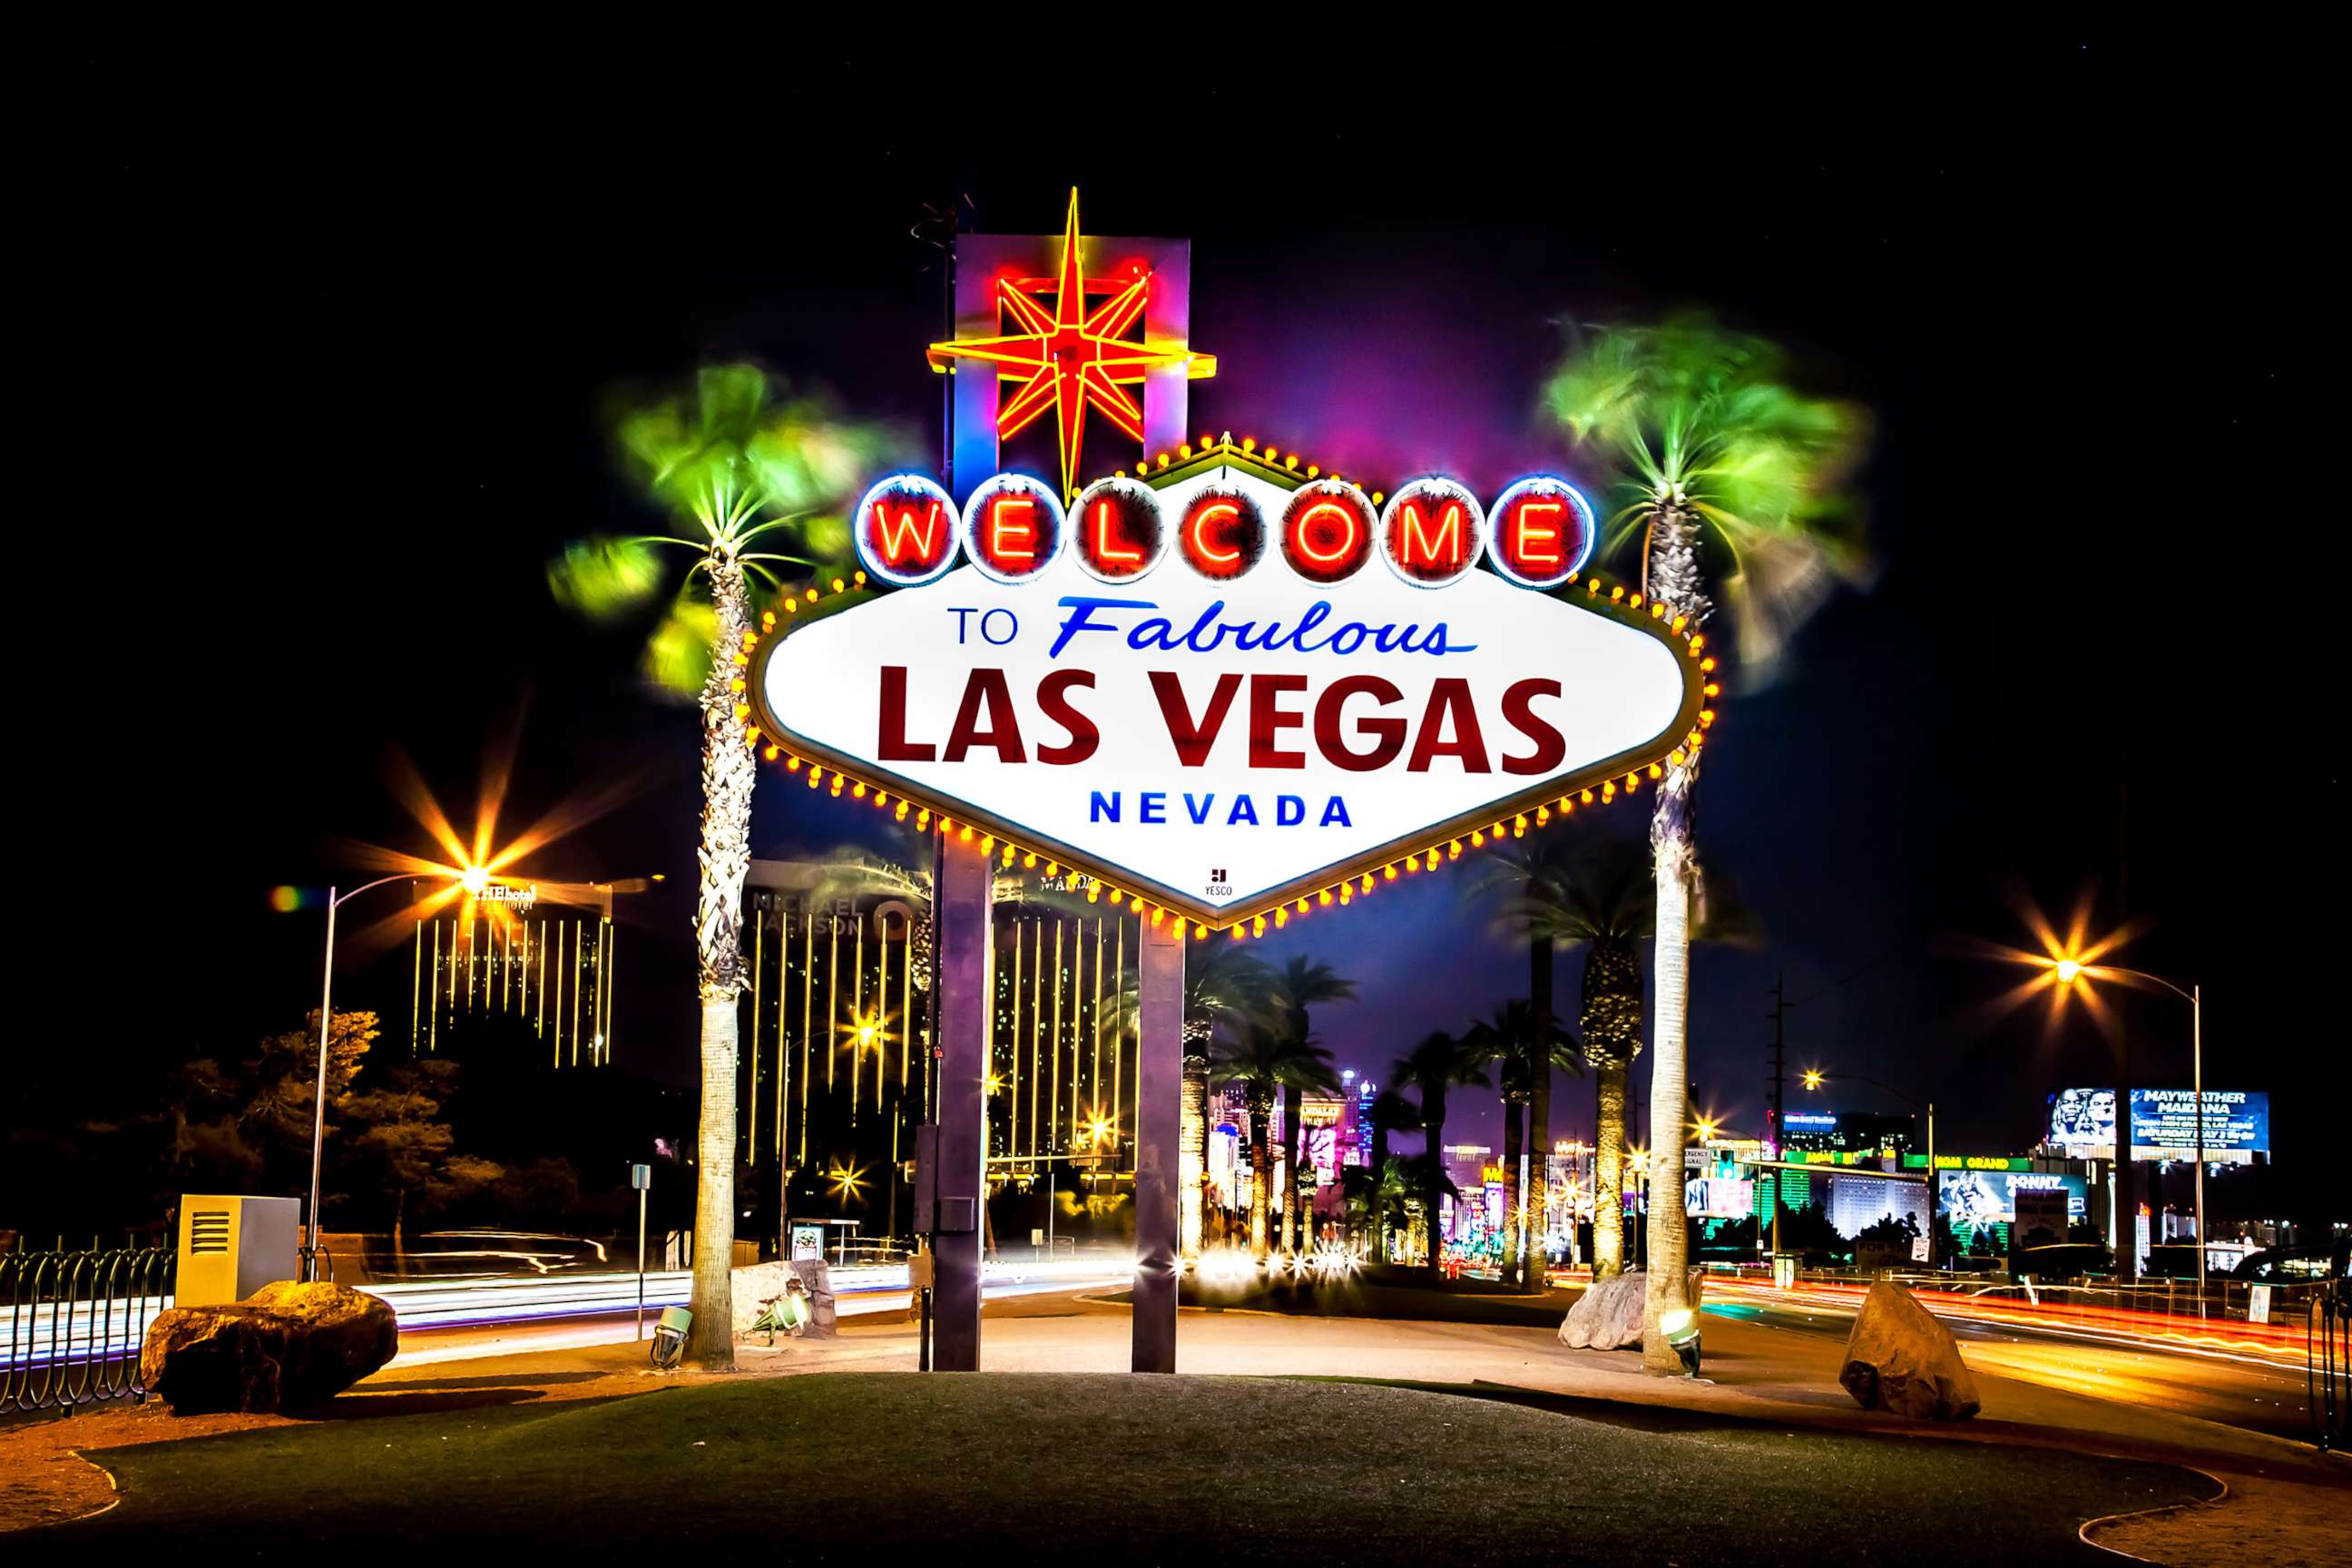 After less than a year, city of Las Vegas dumps flashy logo